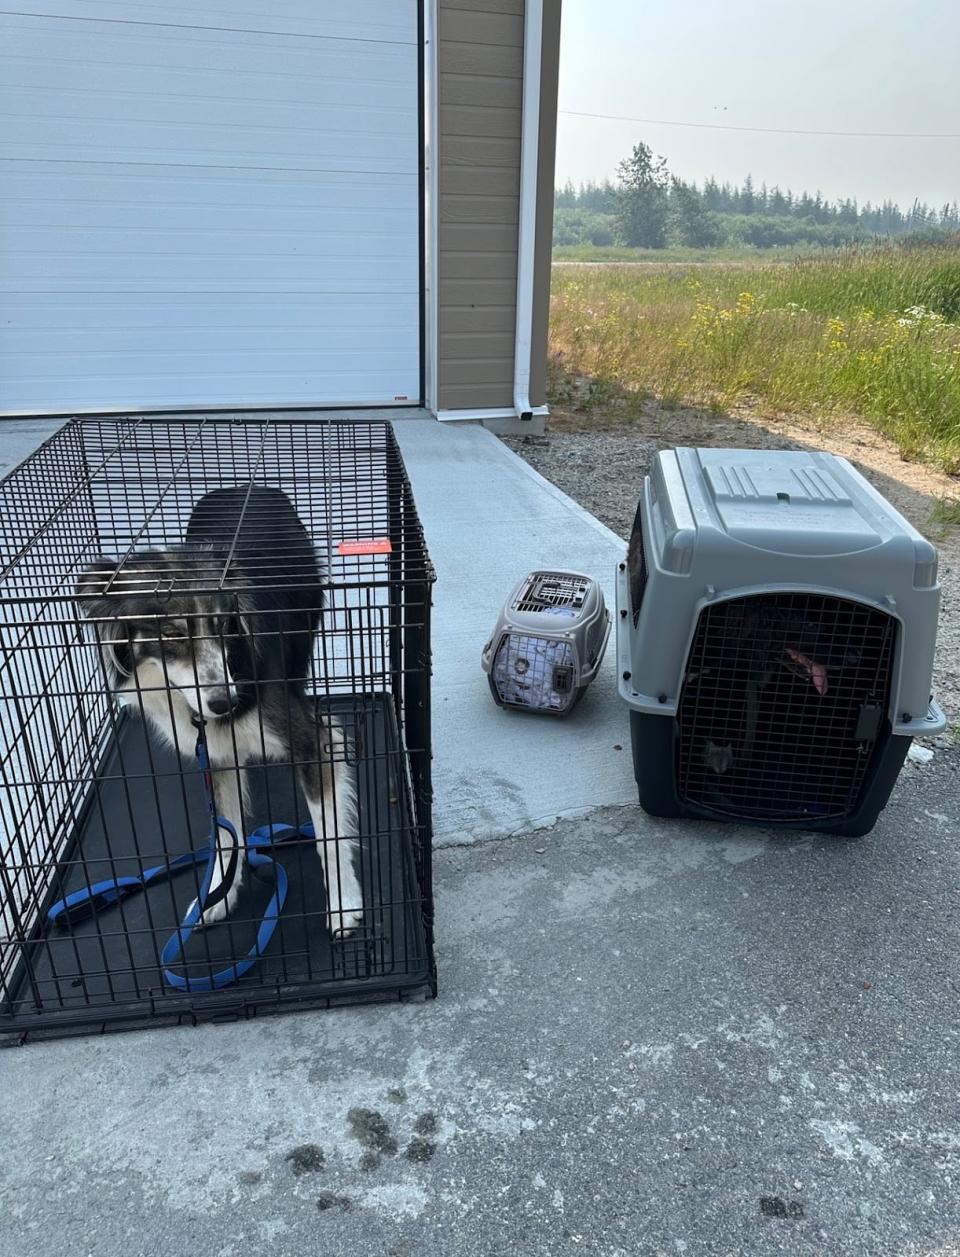 Bo, left, and Bear, right, were among the dogs caged and preped to leave by helicopter.